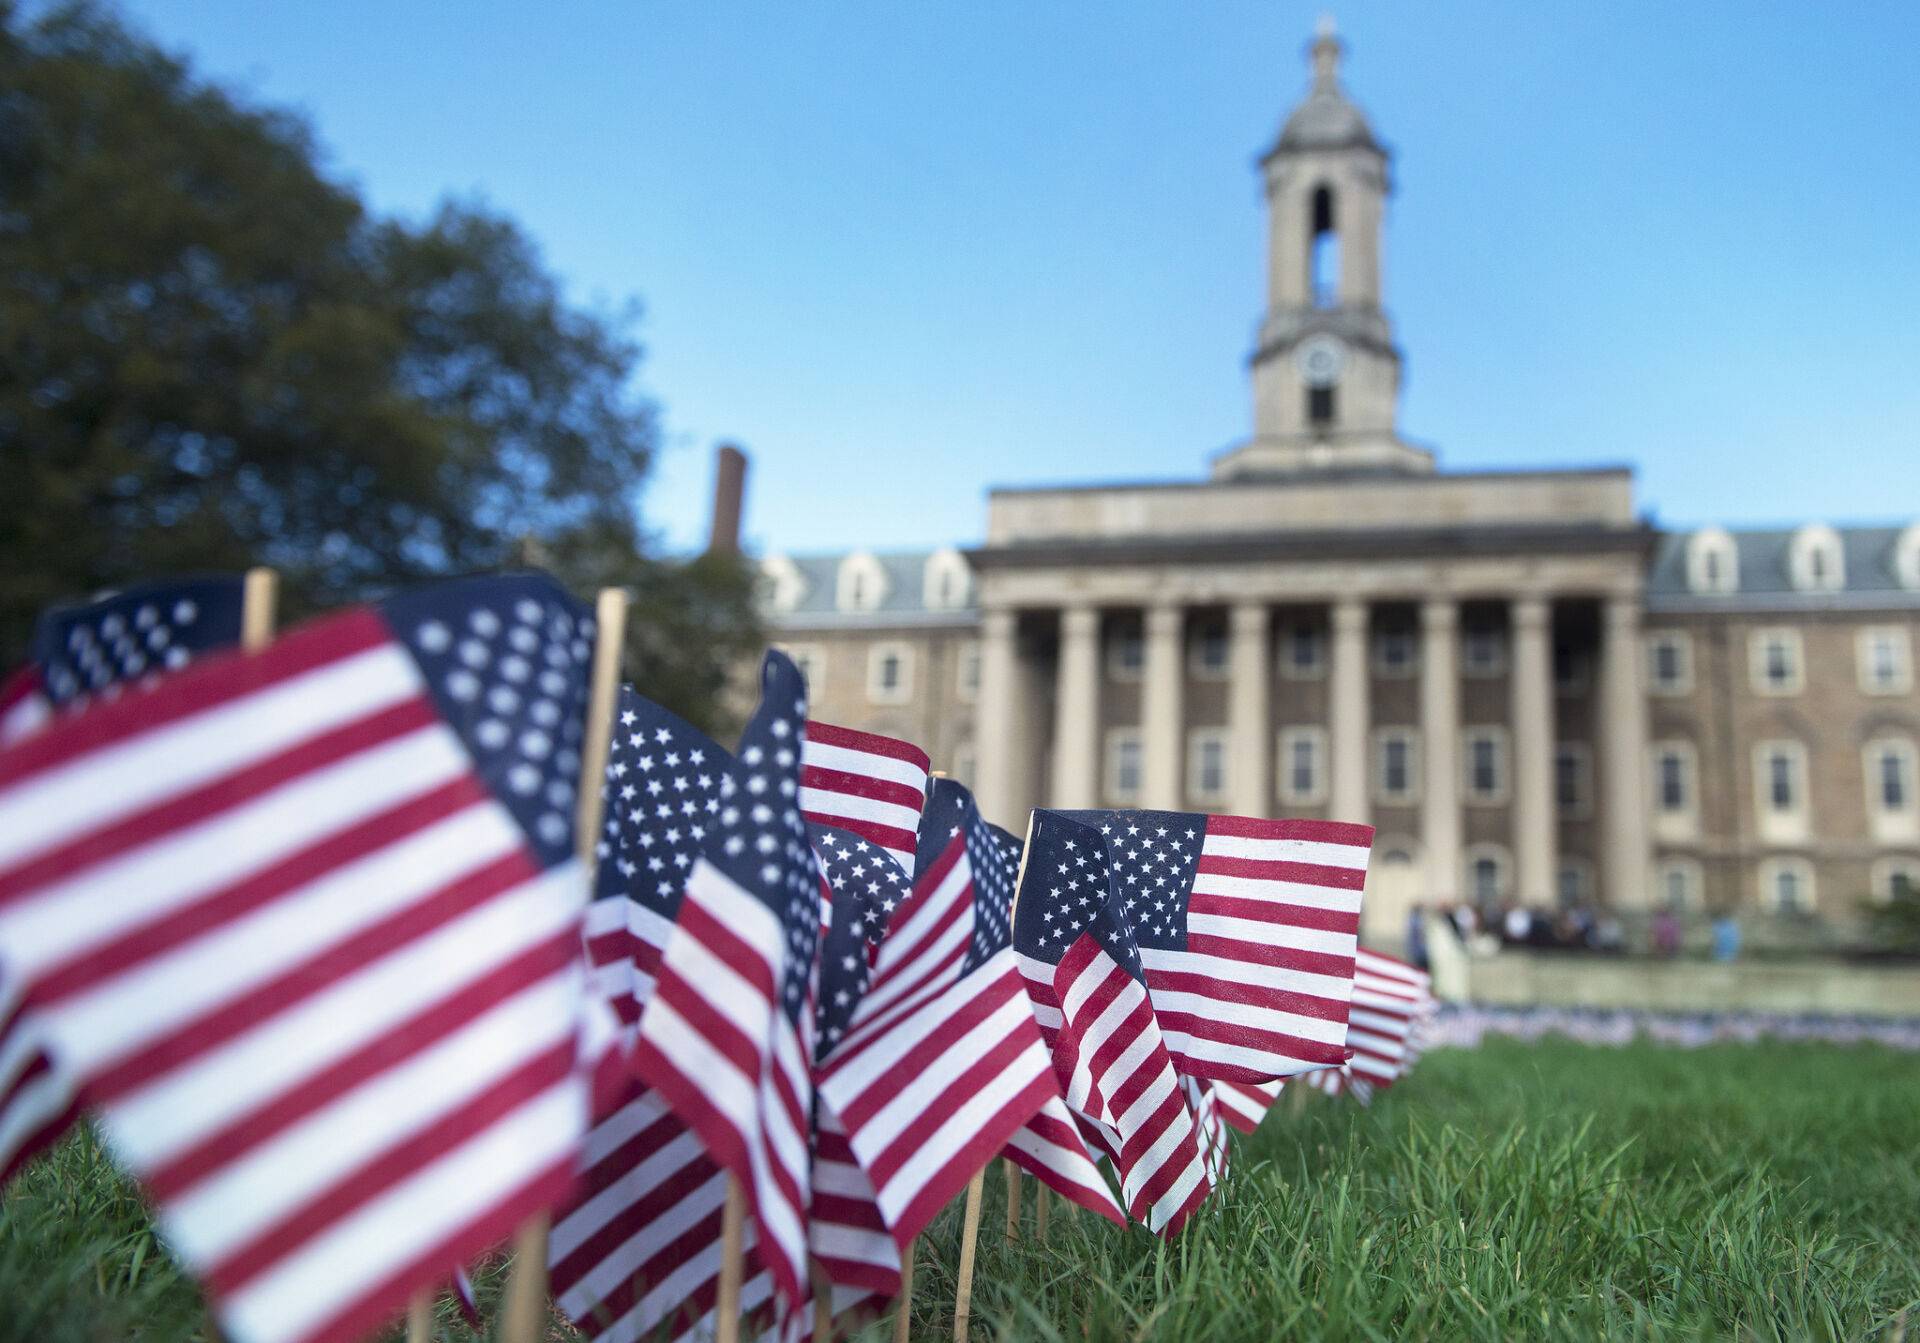 A cluster of small American flags on the lawn of Old Main in focus in the foreground; Old Main in the distance.